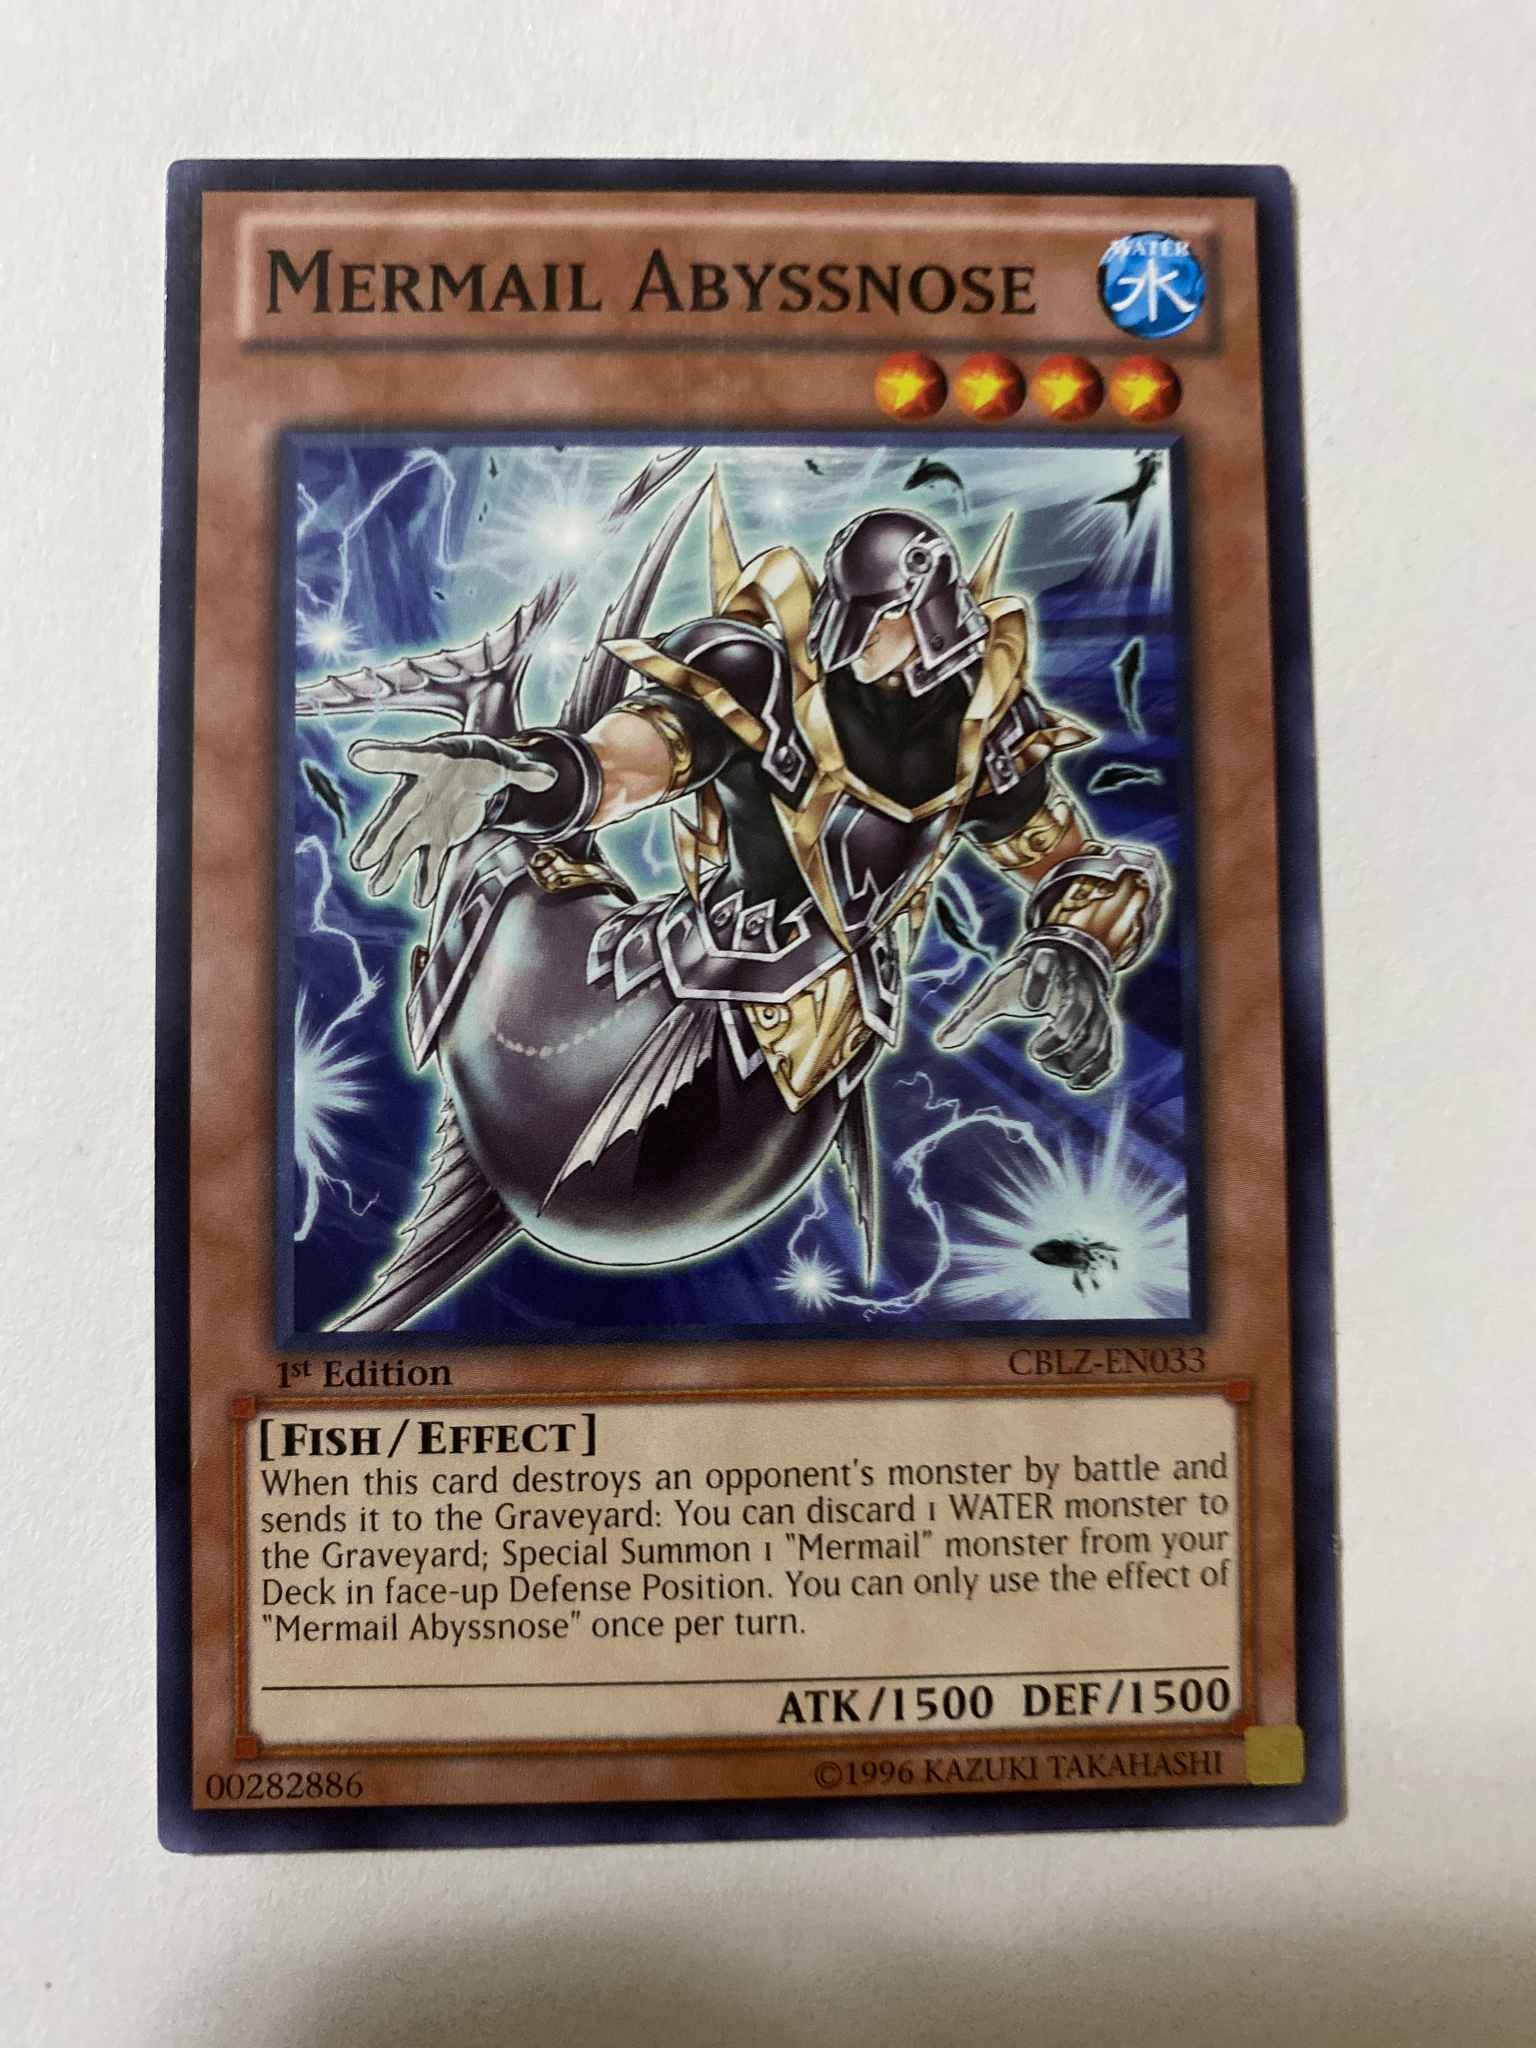 Mermail Abyssnose CBLZ-EN033 Common Yu-Gi-Oh Card 1st Edition New